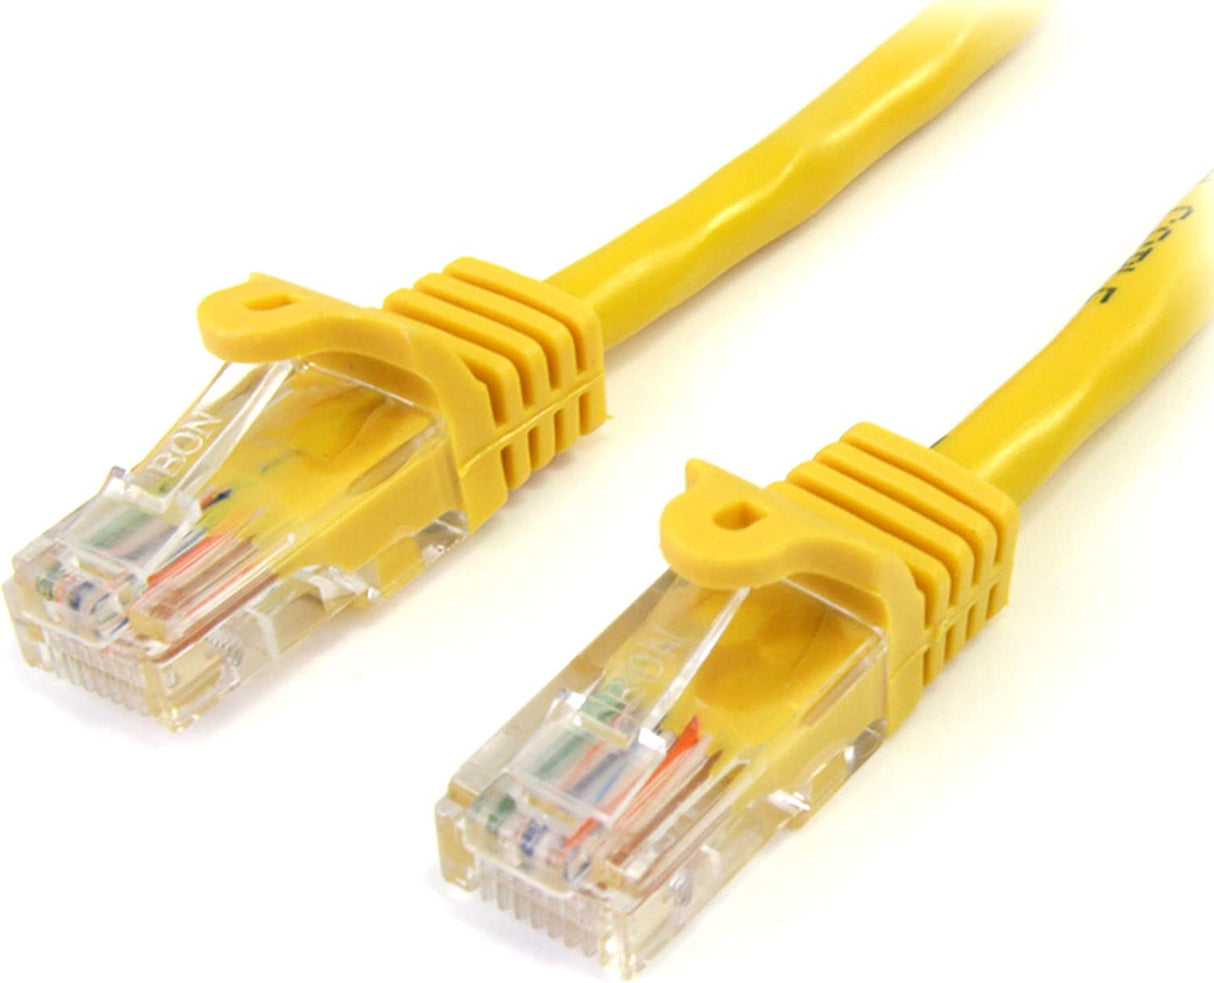 StarTech.com Cat5e Patch Cable with Snagless RJ45 Connectors - 3 ft, Yellow (45PATCH3YL) 3 ft / 1m Yellow